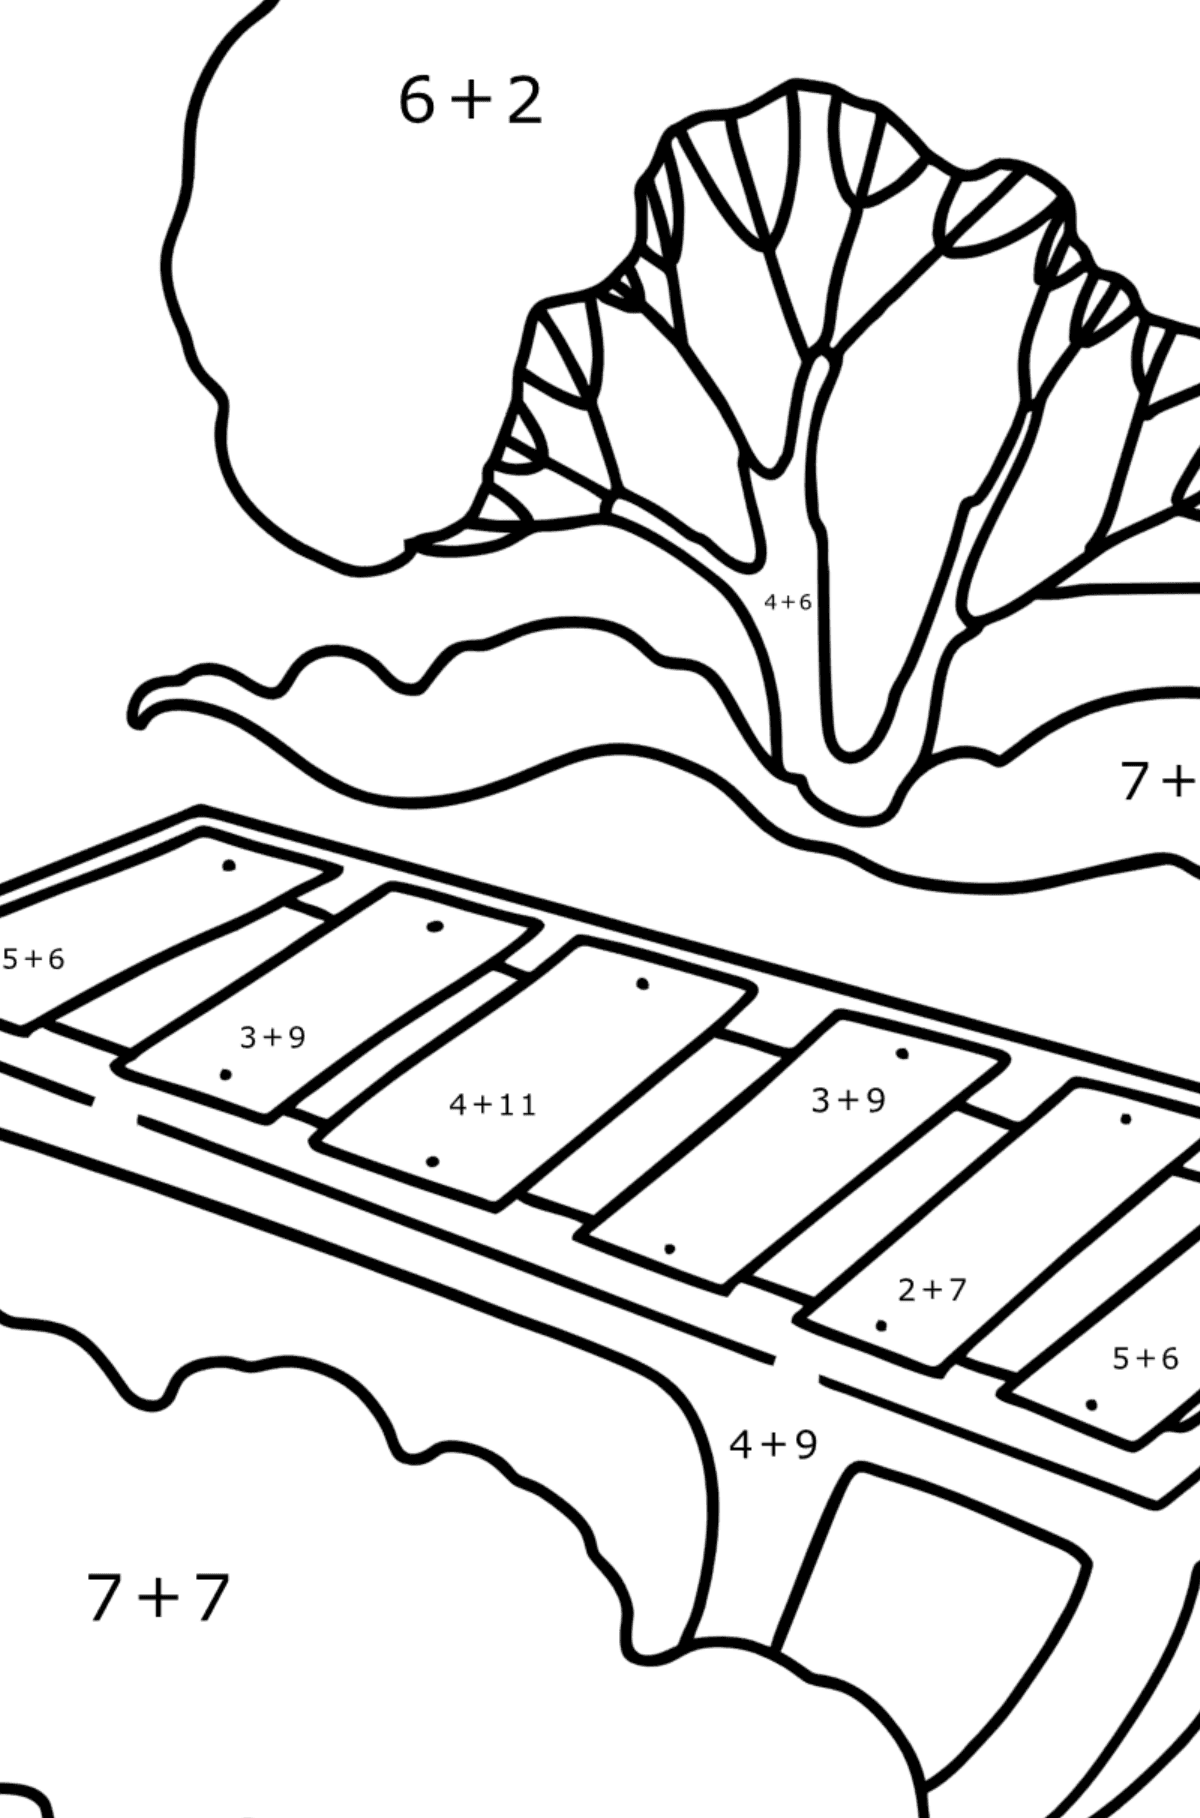 Coloring page - Sled for Kids - Math Coloring - Addition for Kids